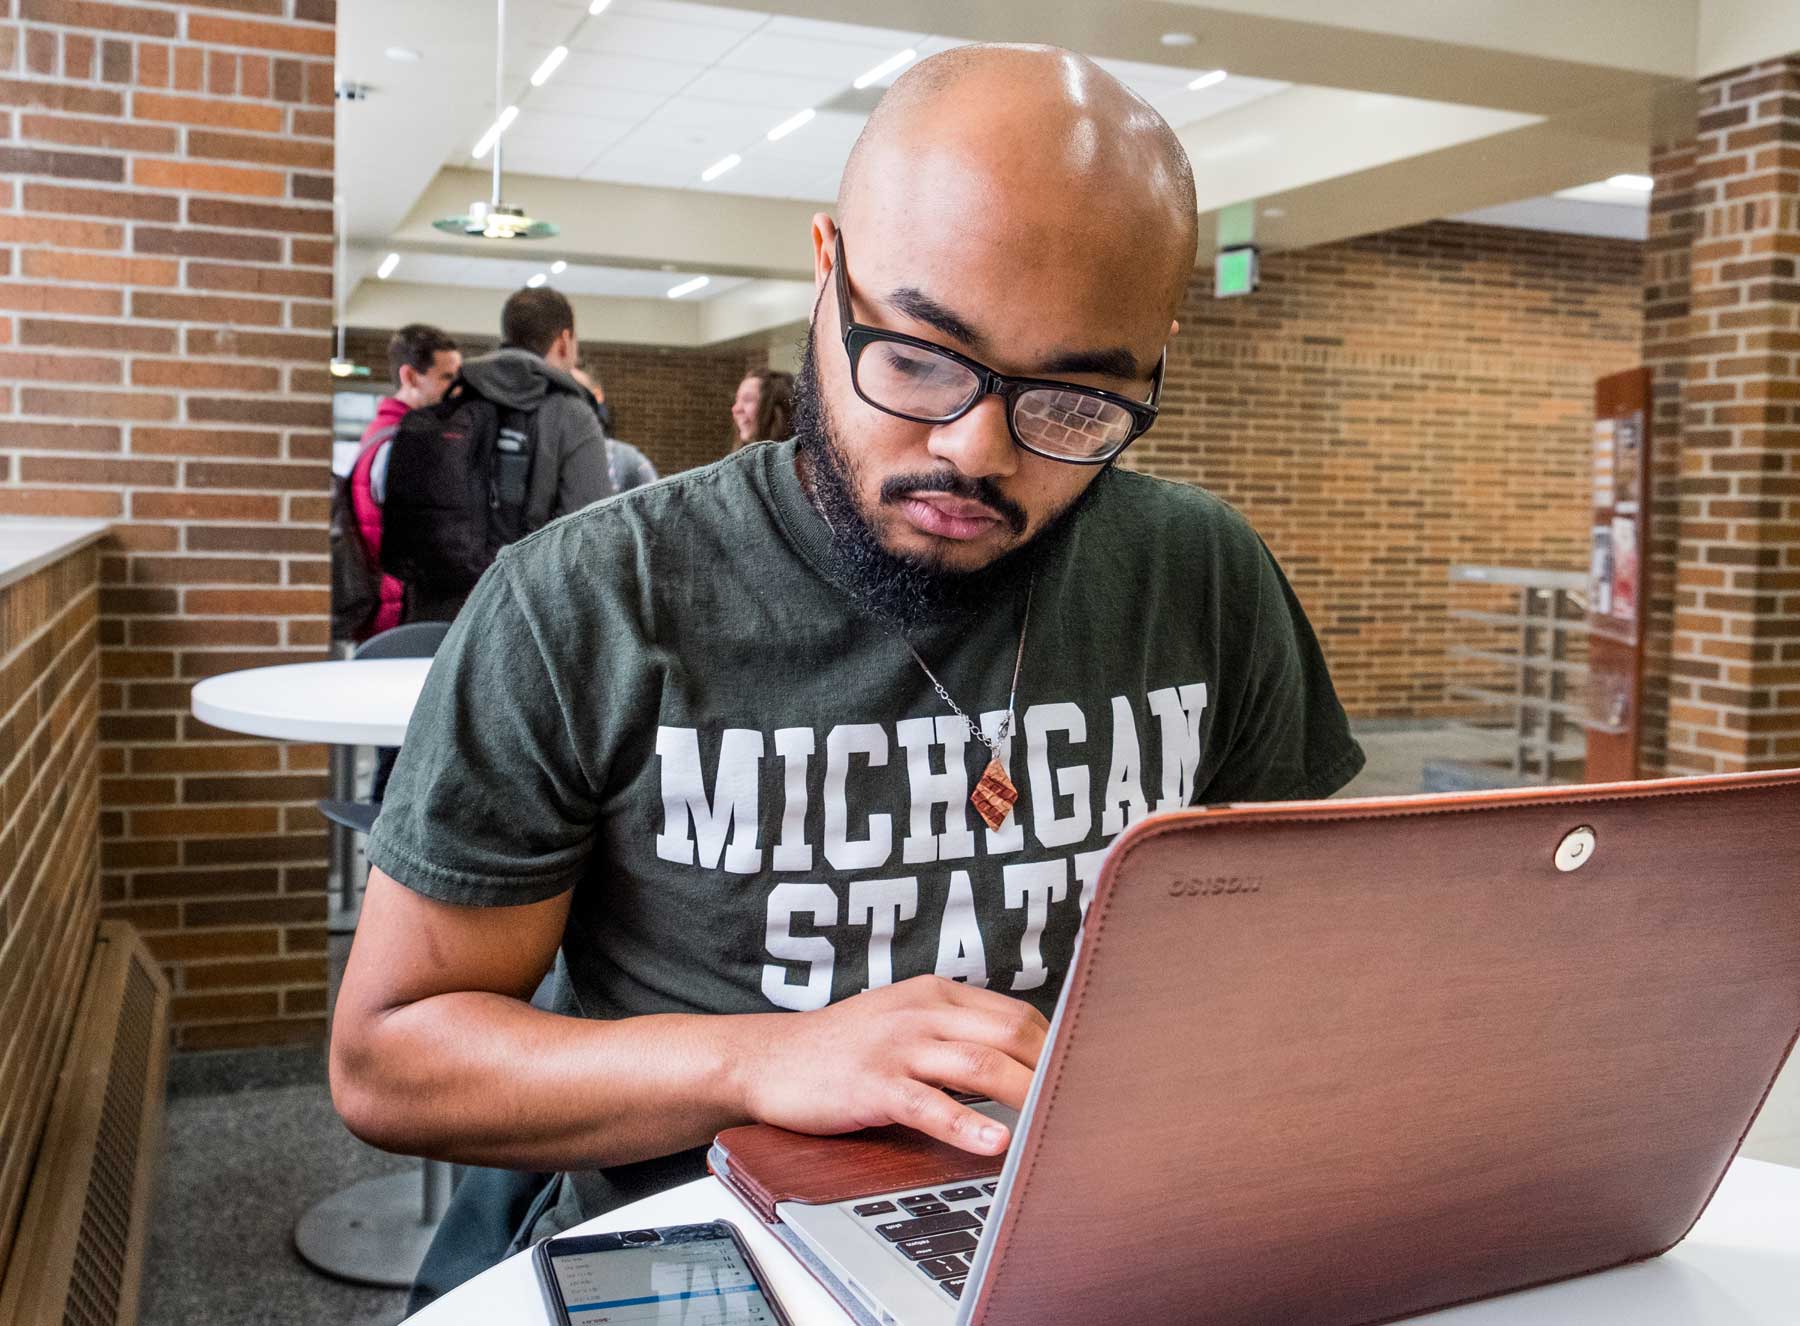 Student working on a laptop in a common area